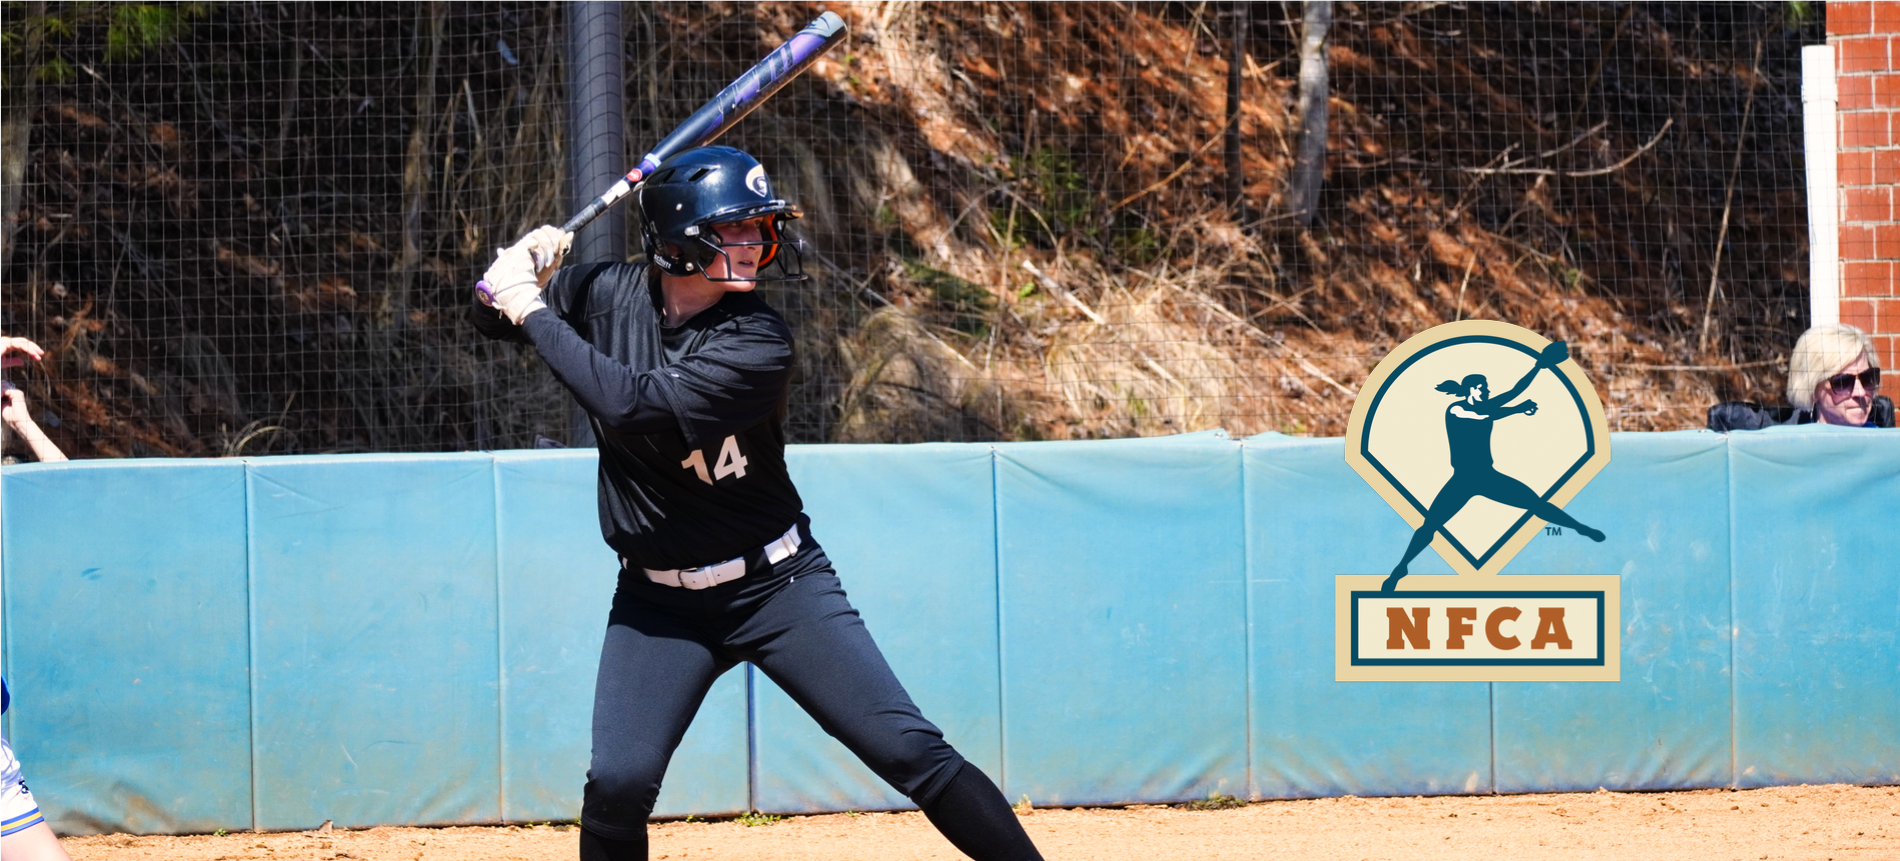 Trojans Ranked No. 14 In Latest DII NFCA Top 25 Coaches Poll